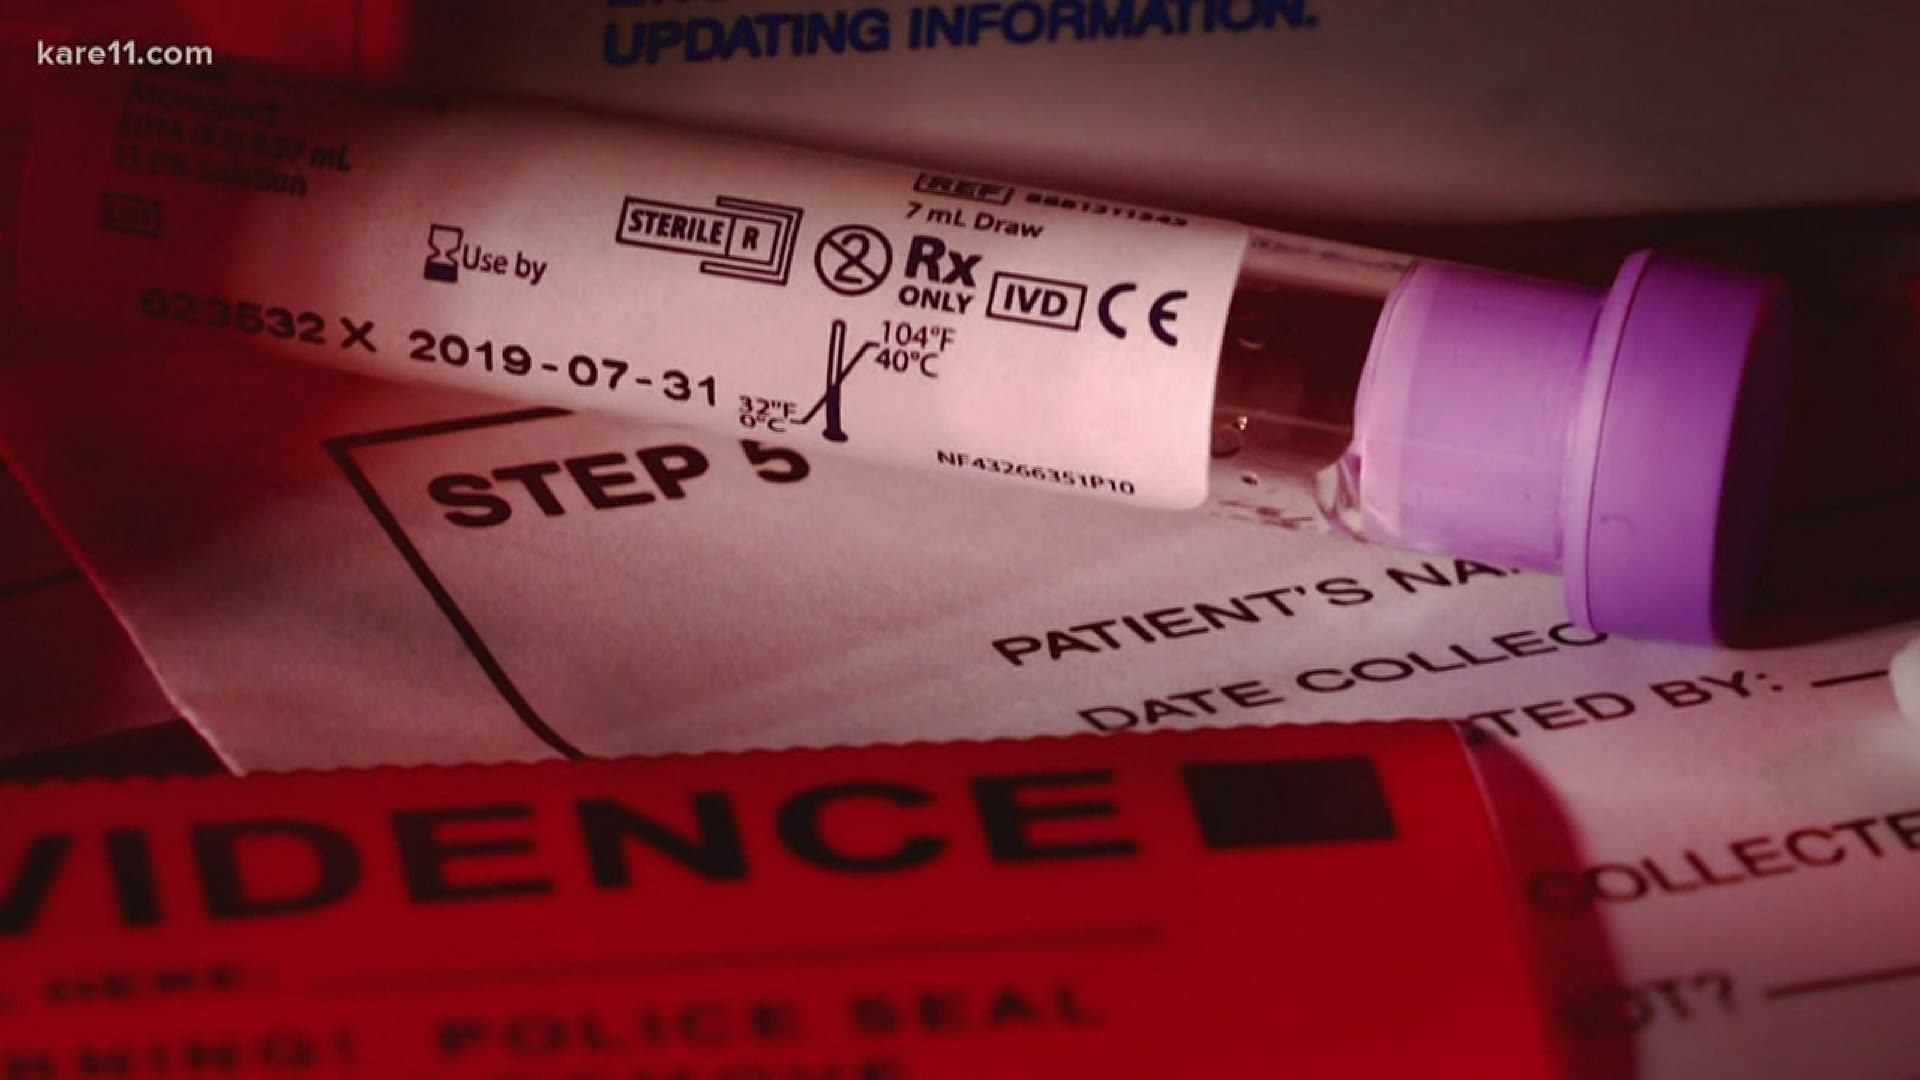 With just days left for lawmakers to vote, a KARE 11 investigation finds the state crime lab may still be overestimating the cost of expanded DNA rape kit testing.